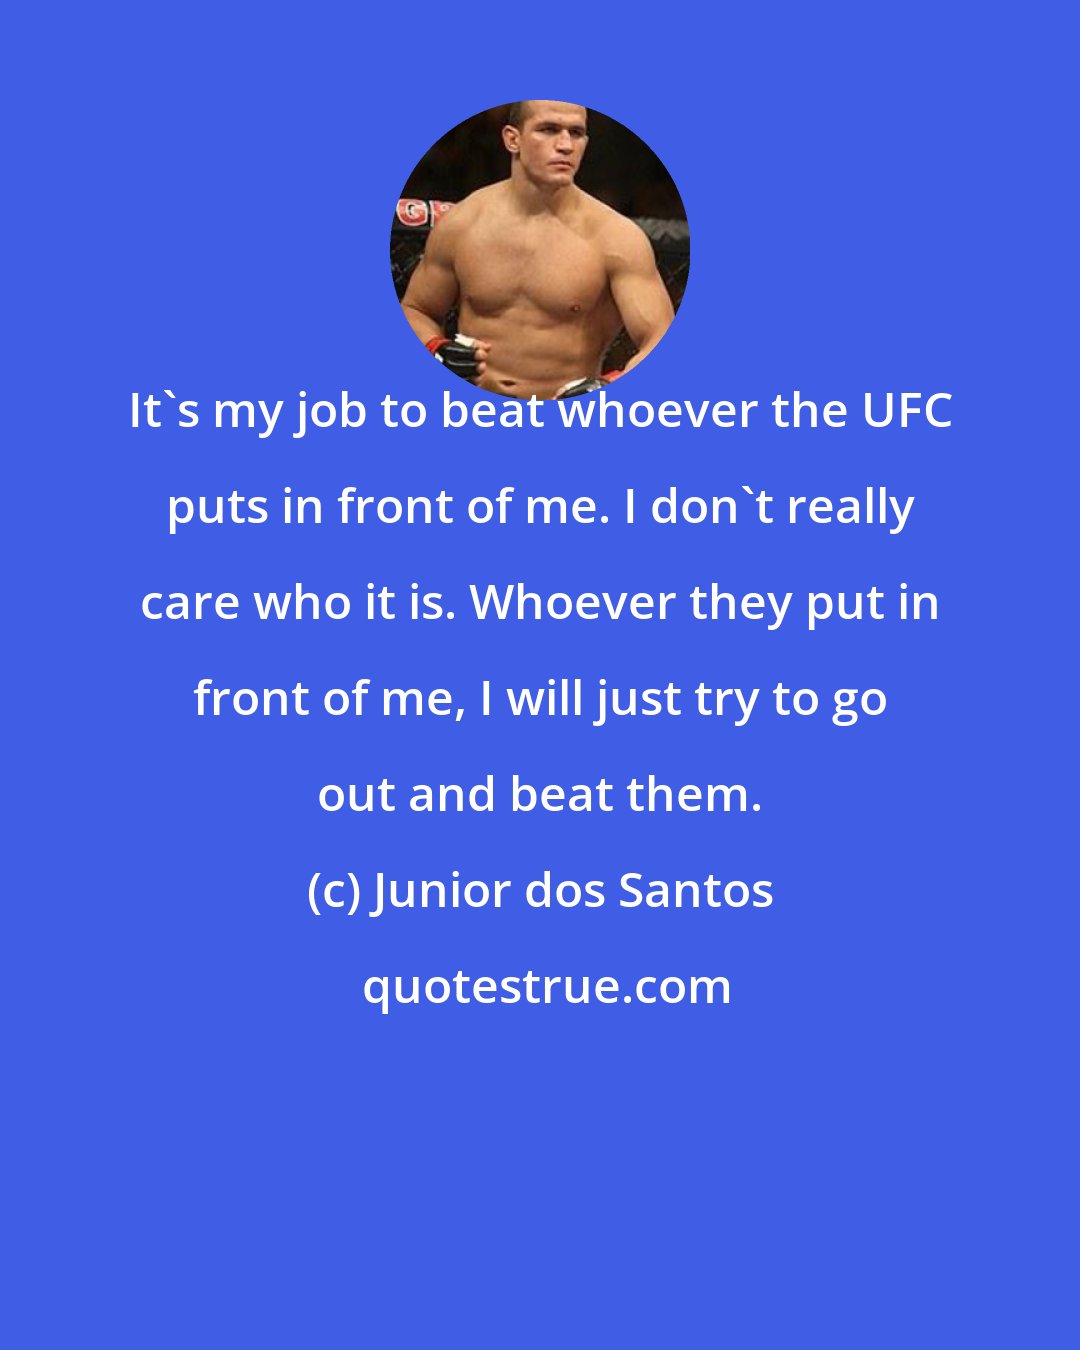 Junior dos Santos: It's my job to beat whoever the UFC puts in front of me. I don't really care who it is. Whoever they put in front of me, I will just try to go out and beat them.